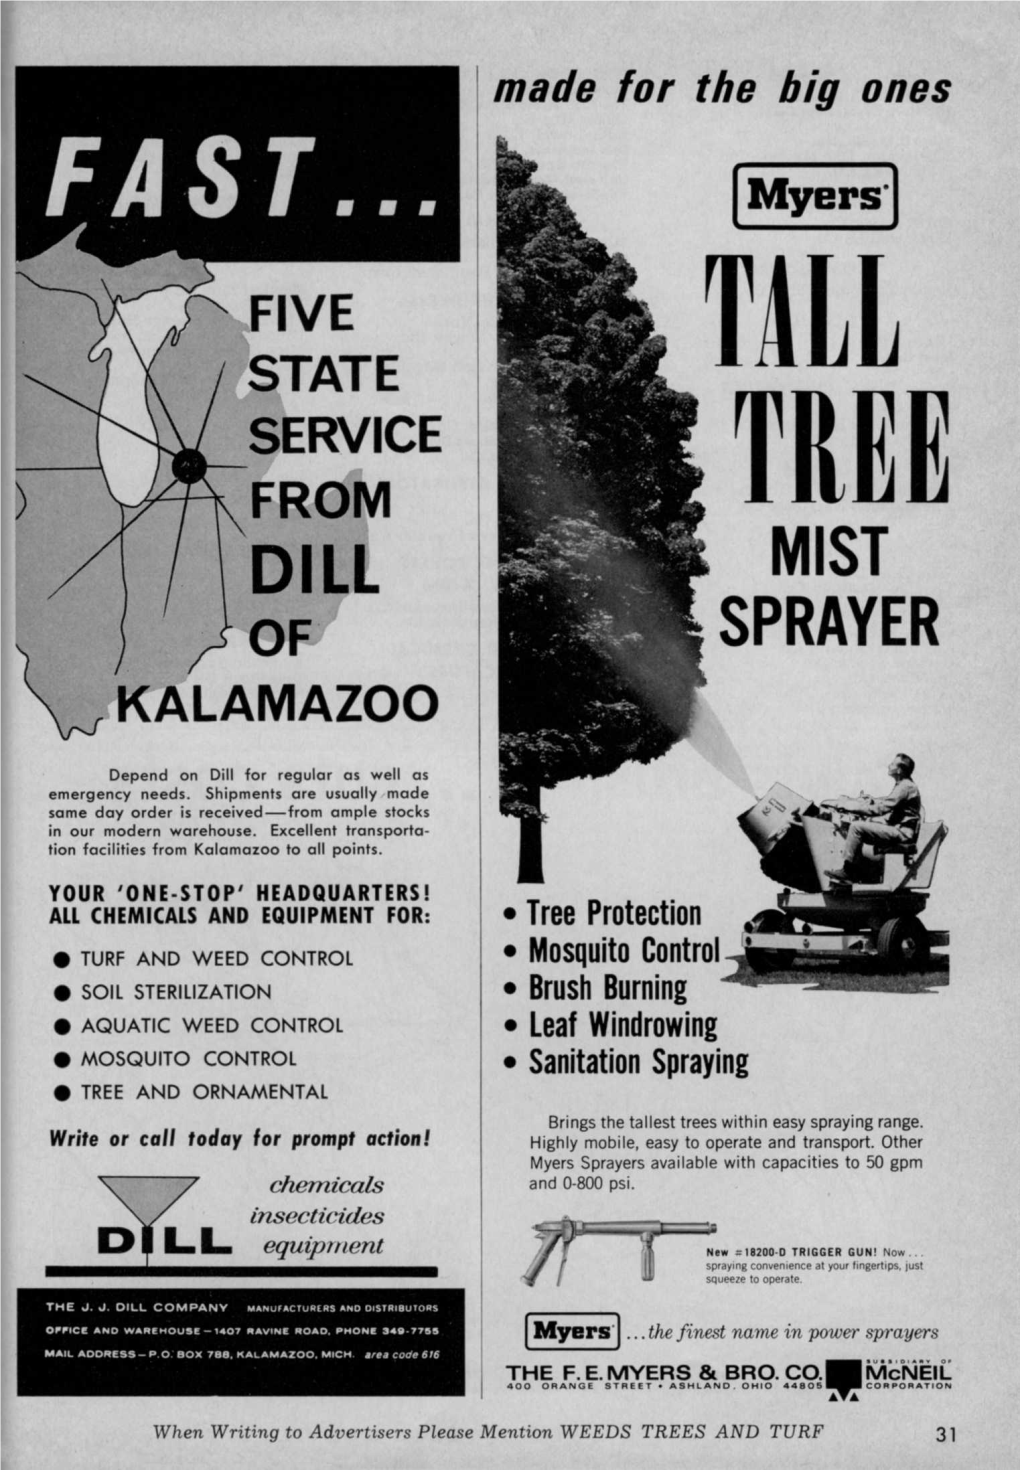 FAST... Myers FIVE STATE TILL SERVICE from TRIE DILL MIST 0F SPRAYER ,KALAMAZO / O